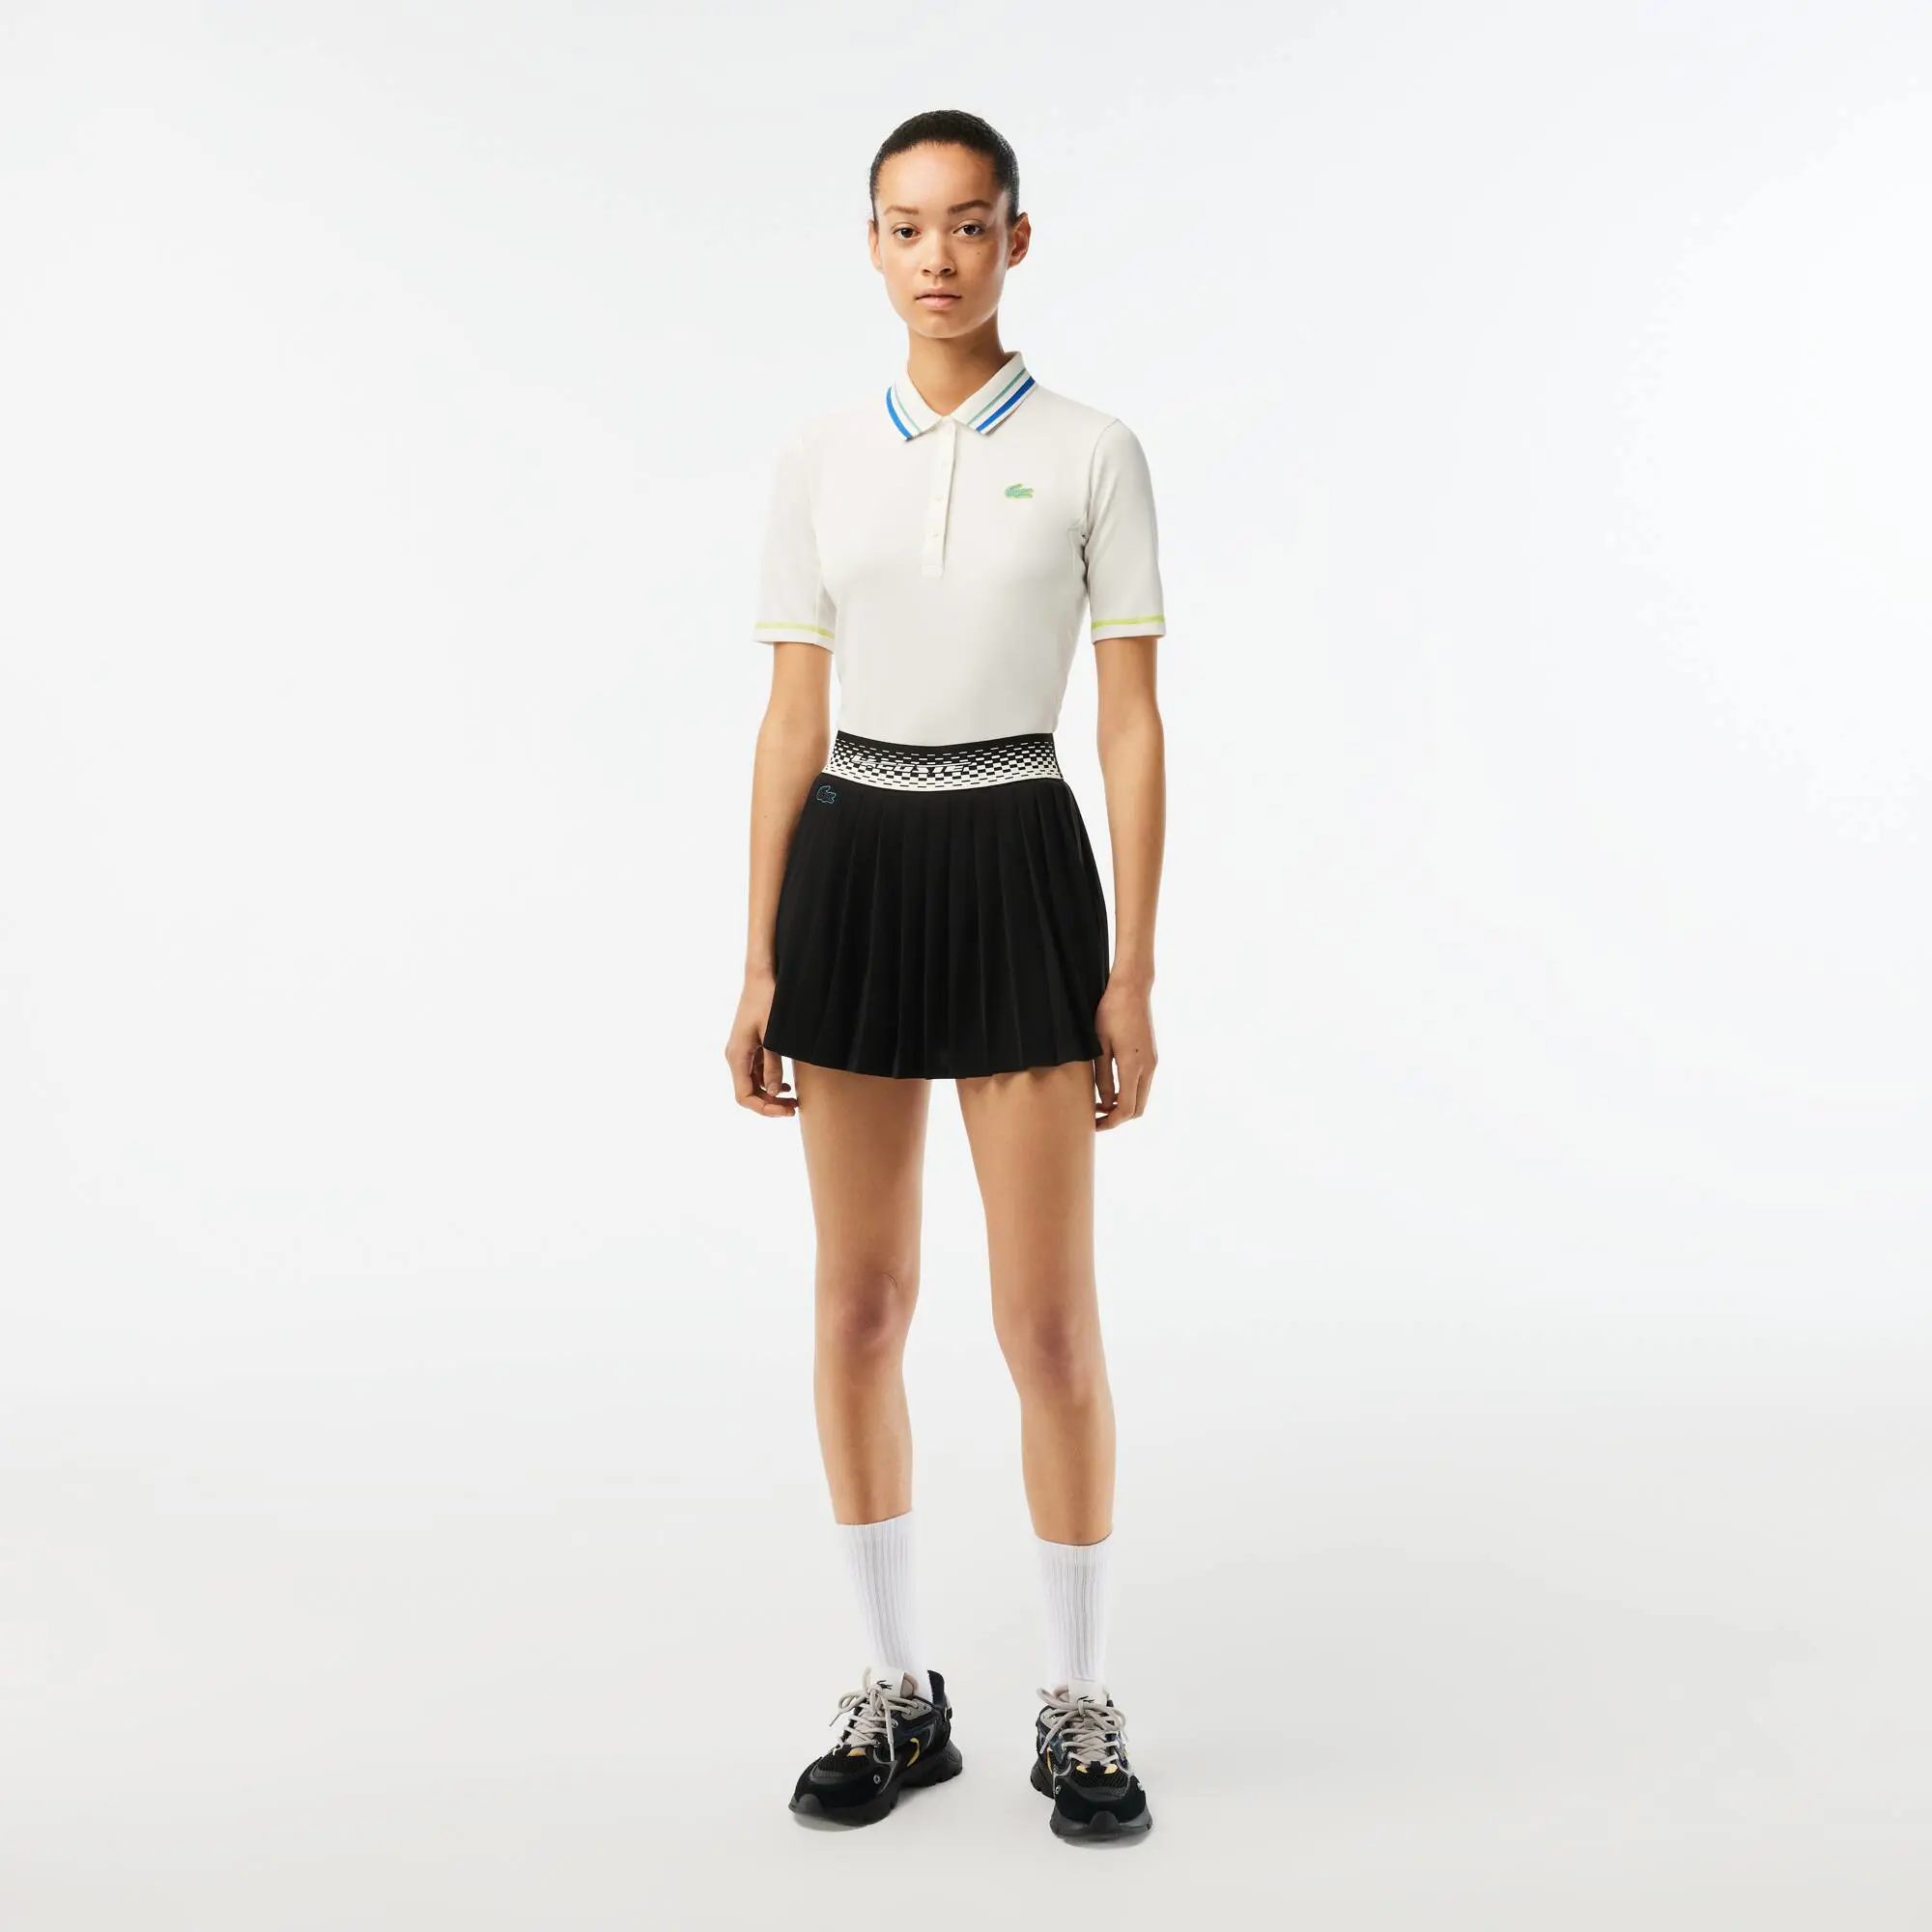 Lacoste Women’s Lacoste Tennis Pleated Skirts with Built-in Shorts. 1